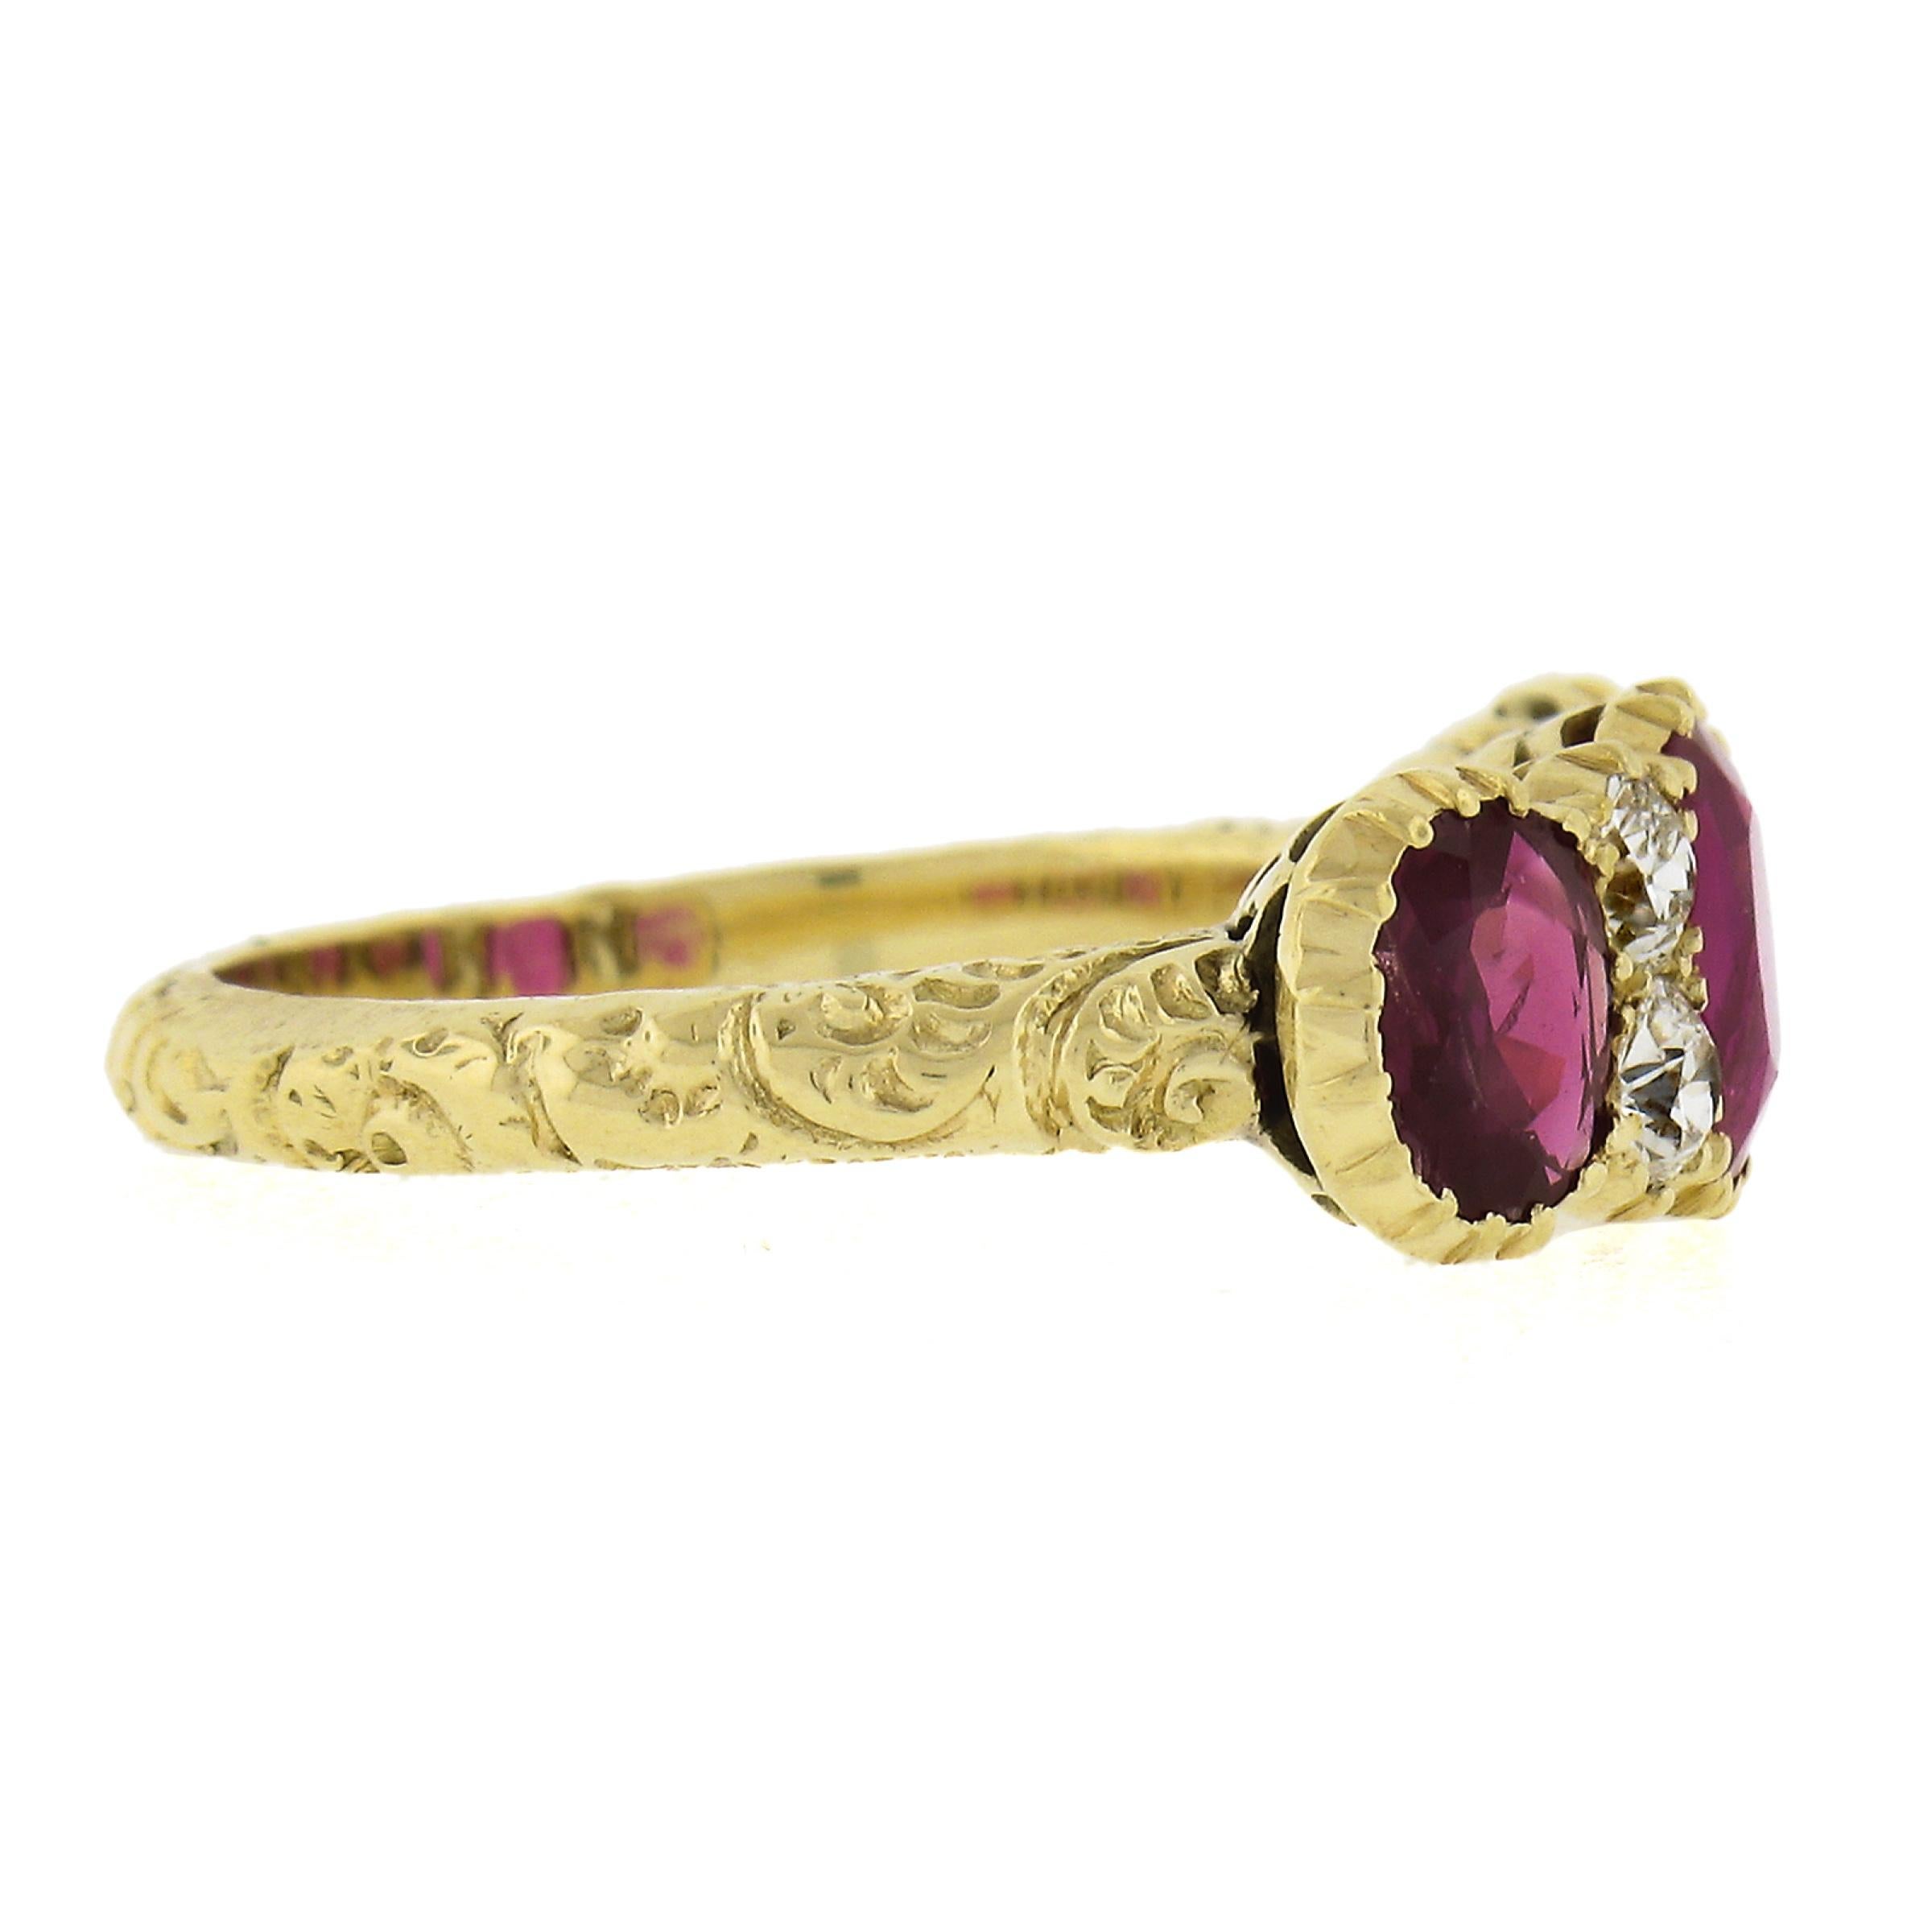 Antique 18k Gold 1.78ct GIA Oval Burma Ruby Old Diamond Scroll Work Band Ring In Excellent Condition For Sale In Montclair, NJ